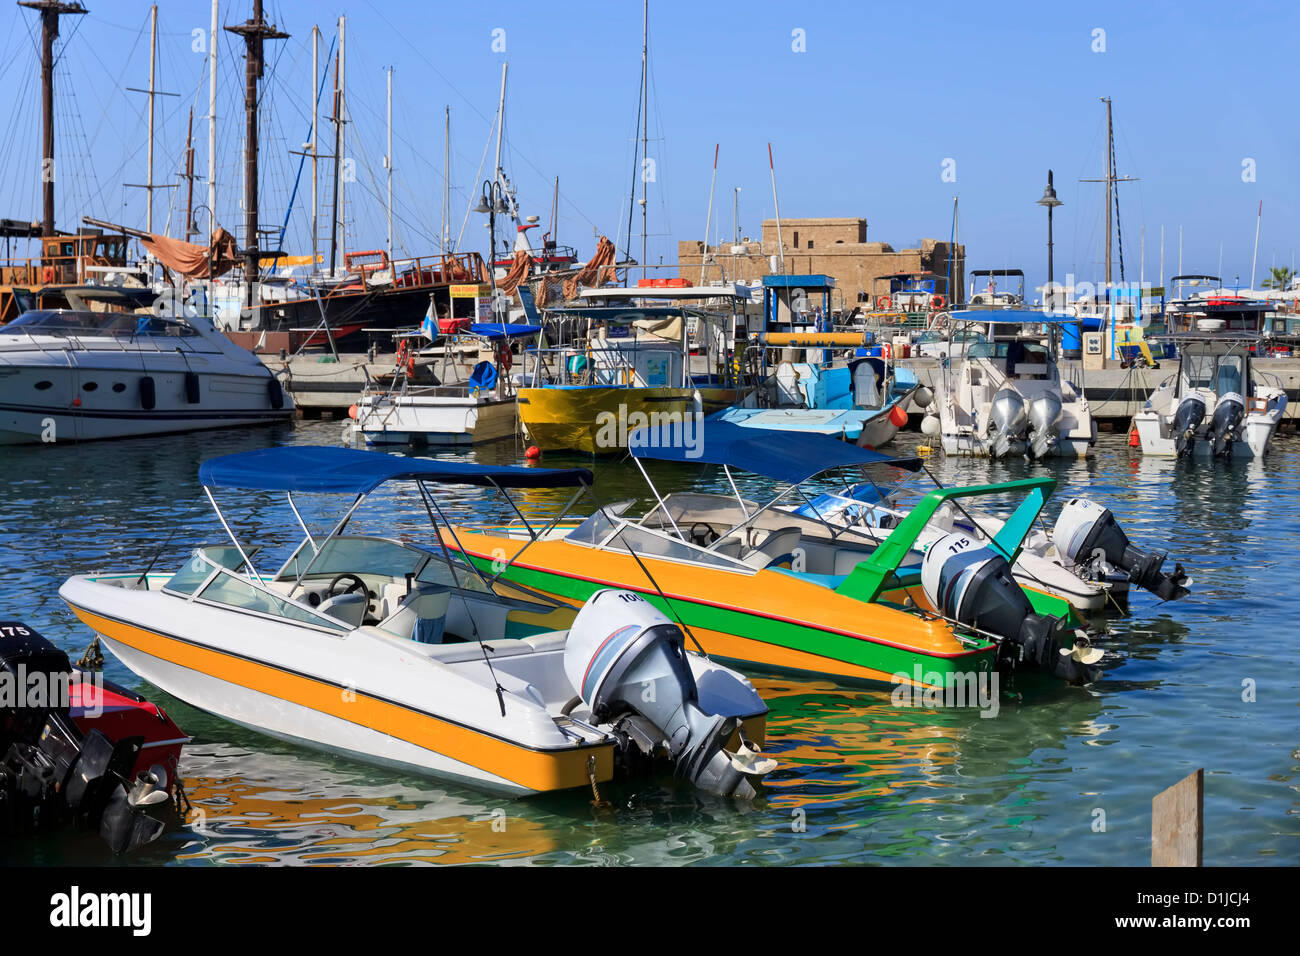 Boats and yachts at Paphos harbor, Cyprus Stock Photo